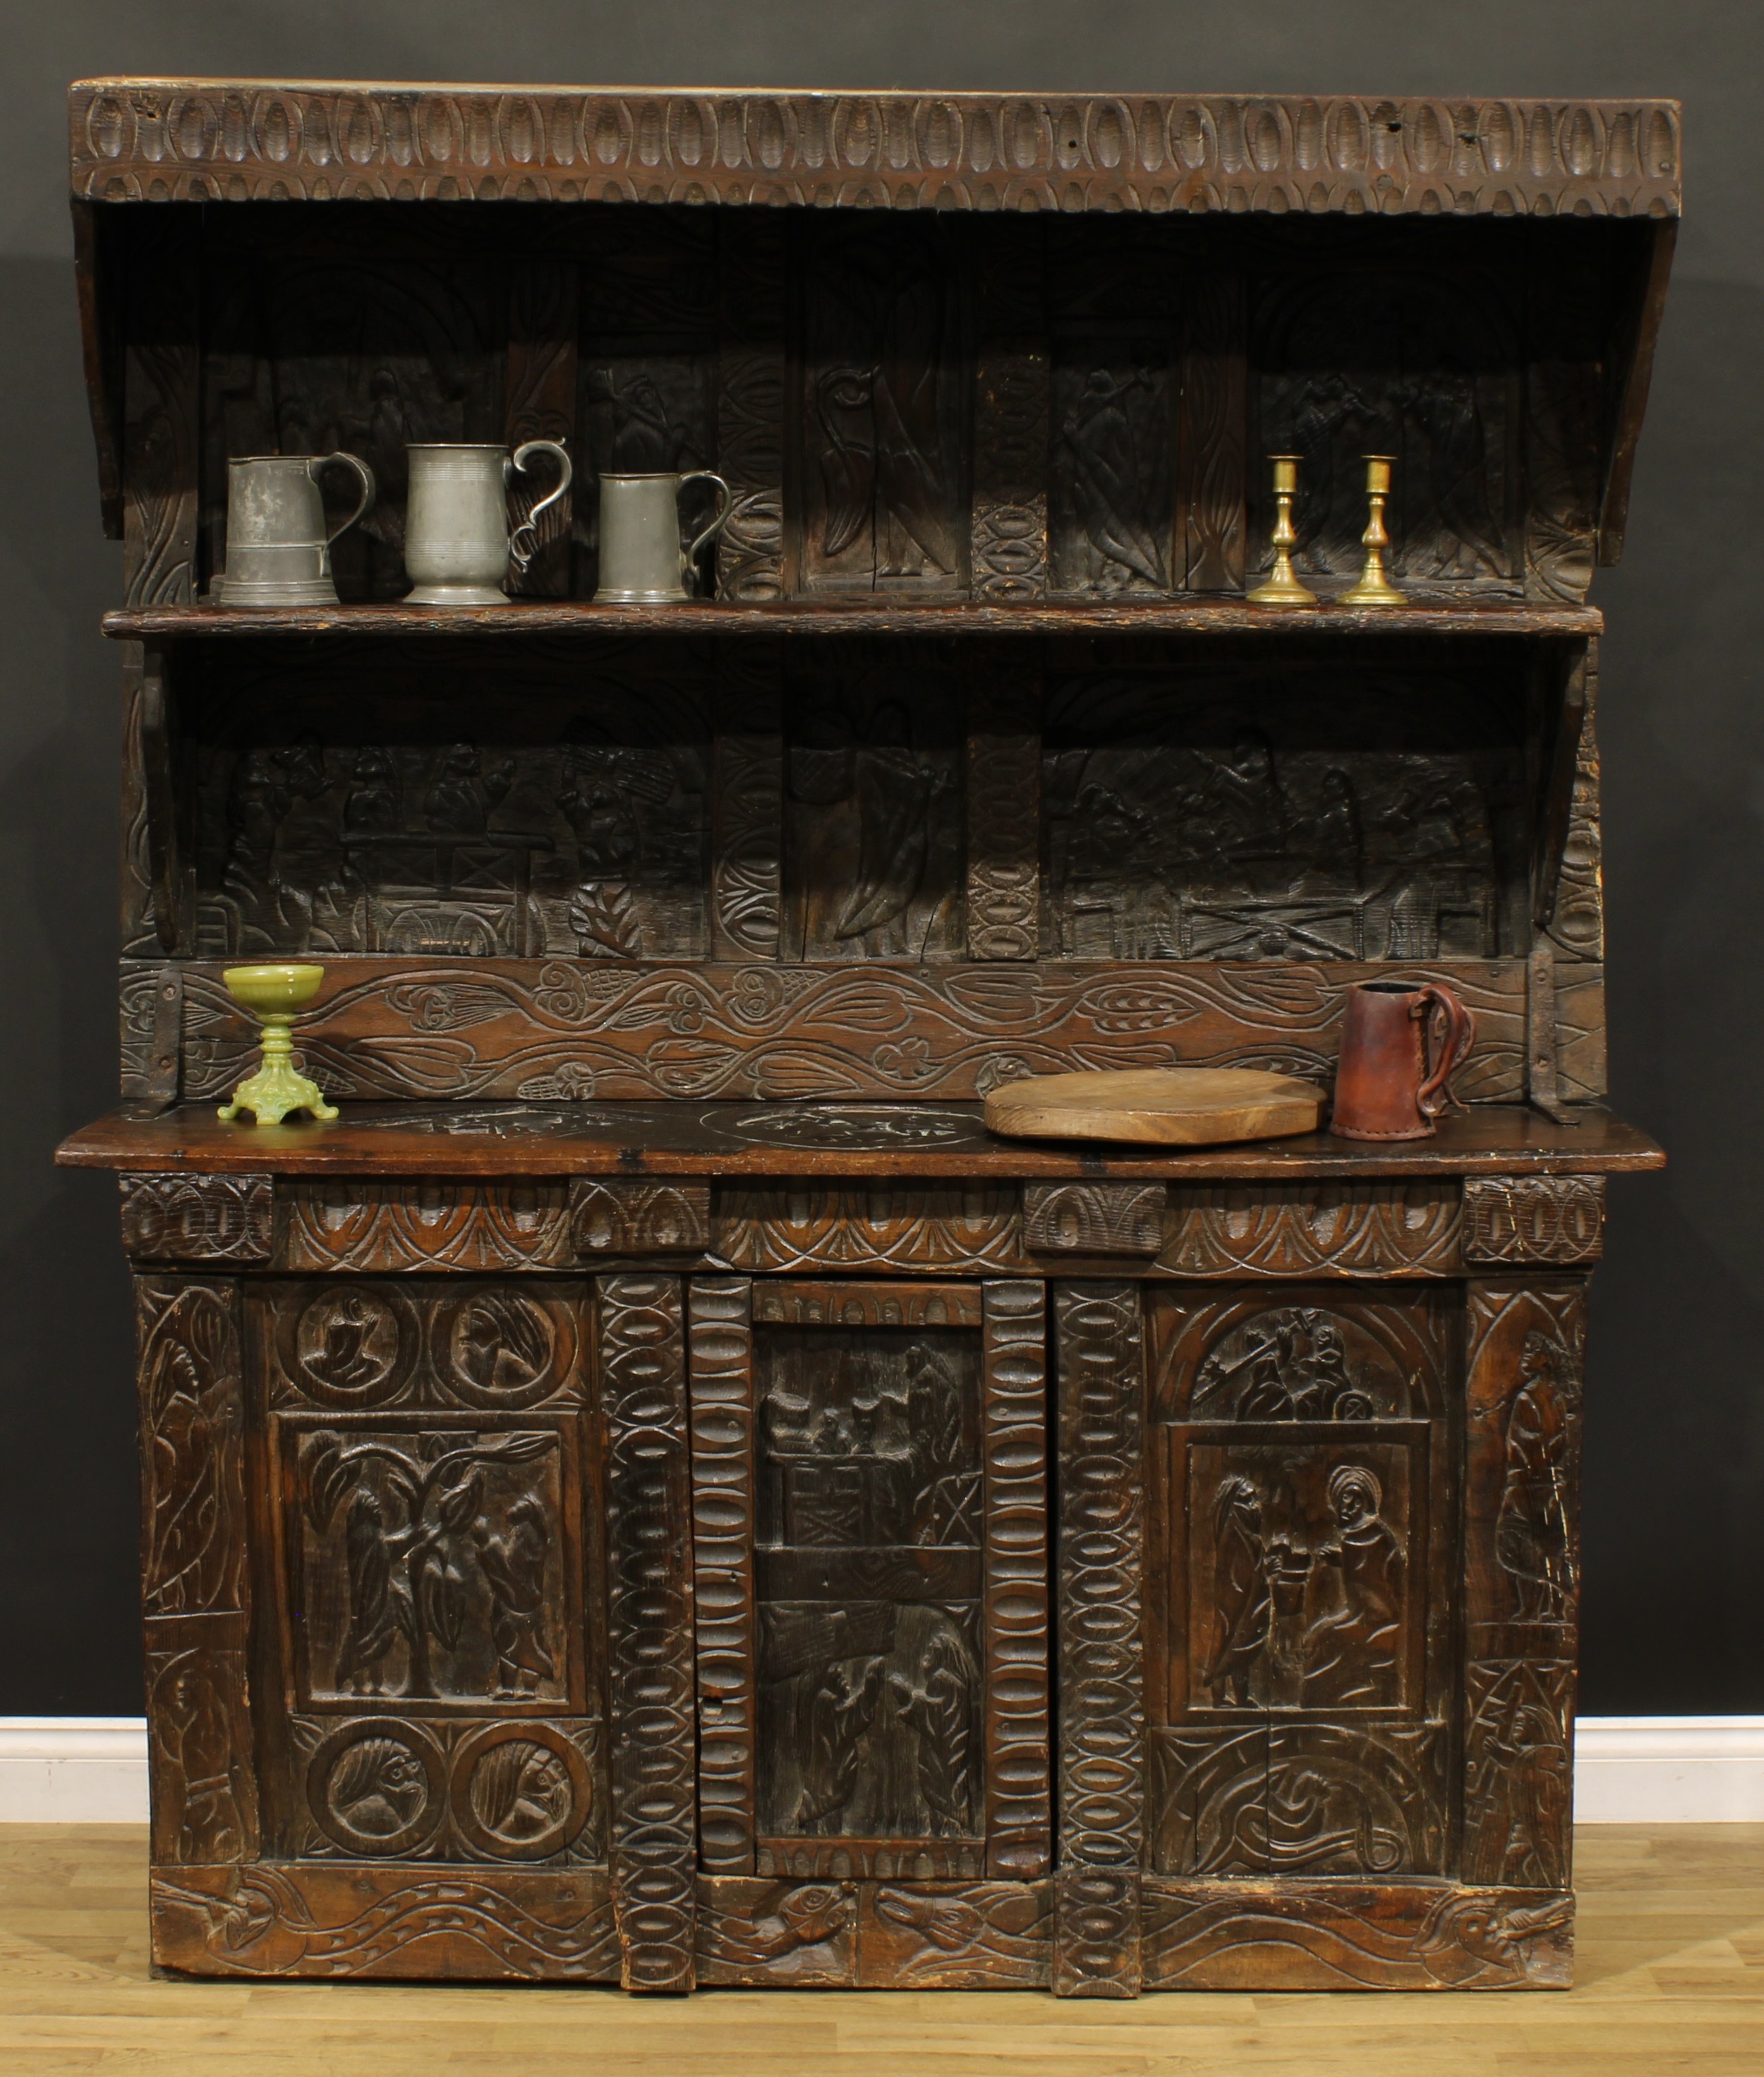 A 17th century style ecclesiastical Historicist Revival oak dresser or side cabinet, carved